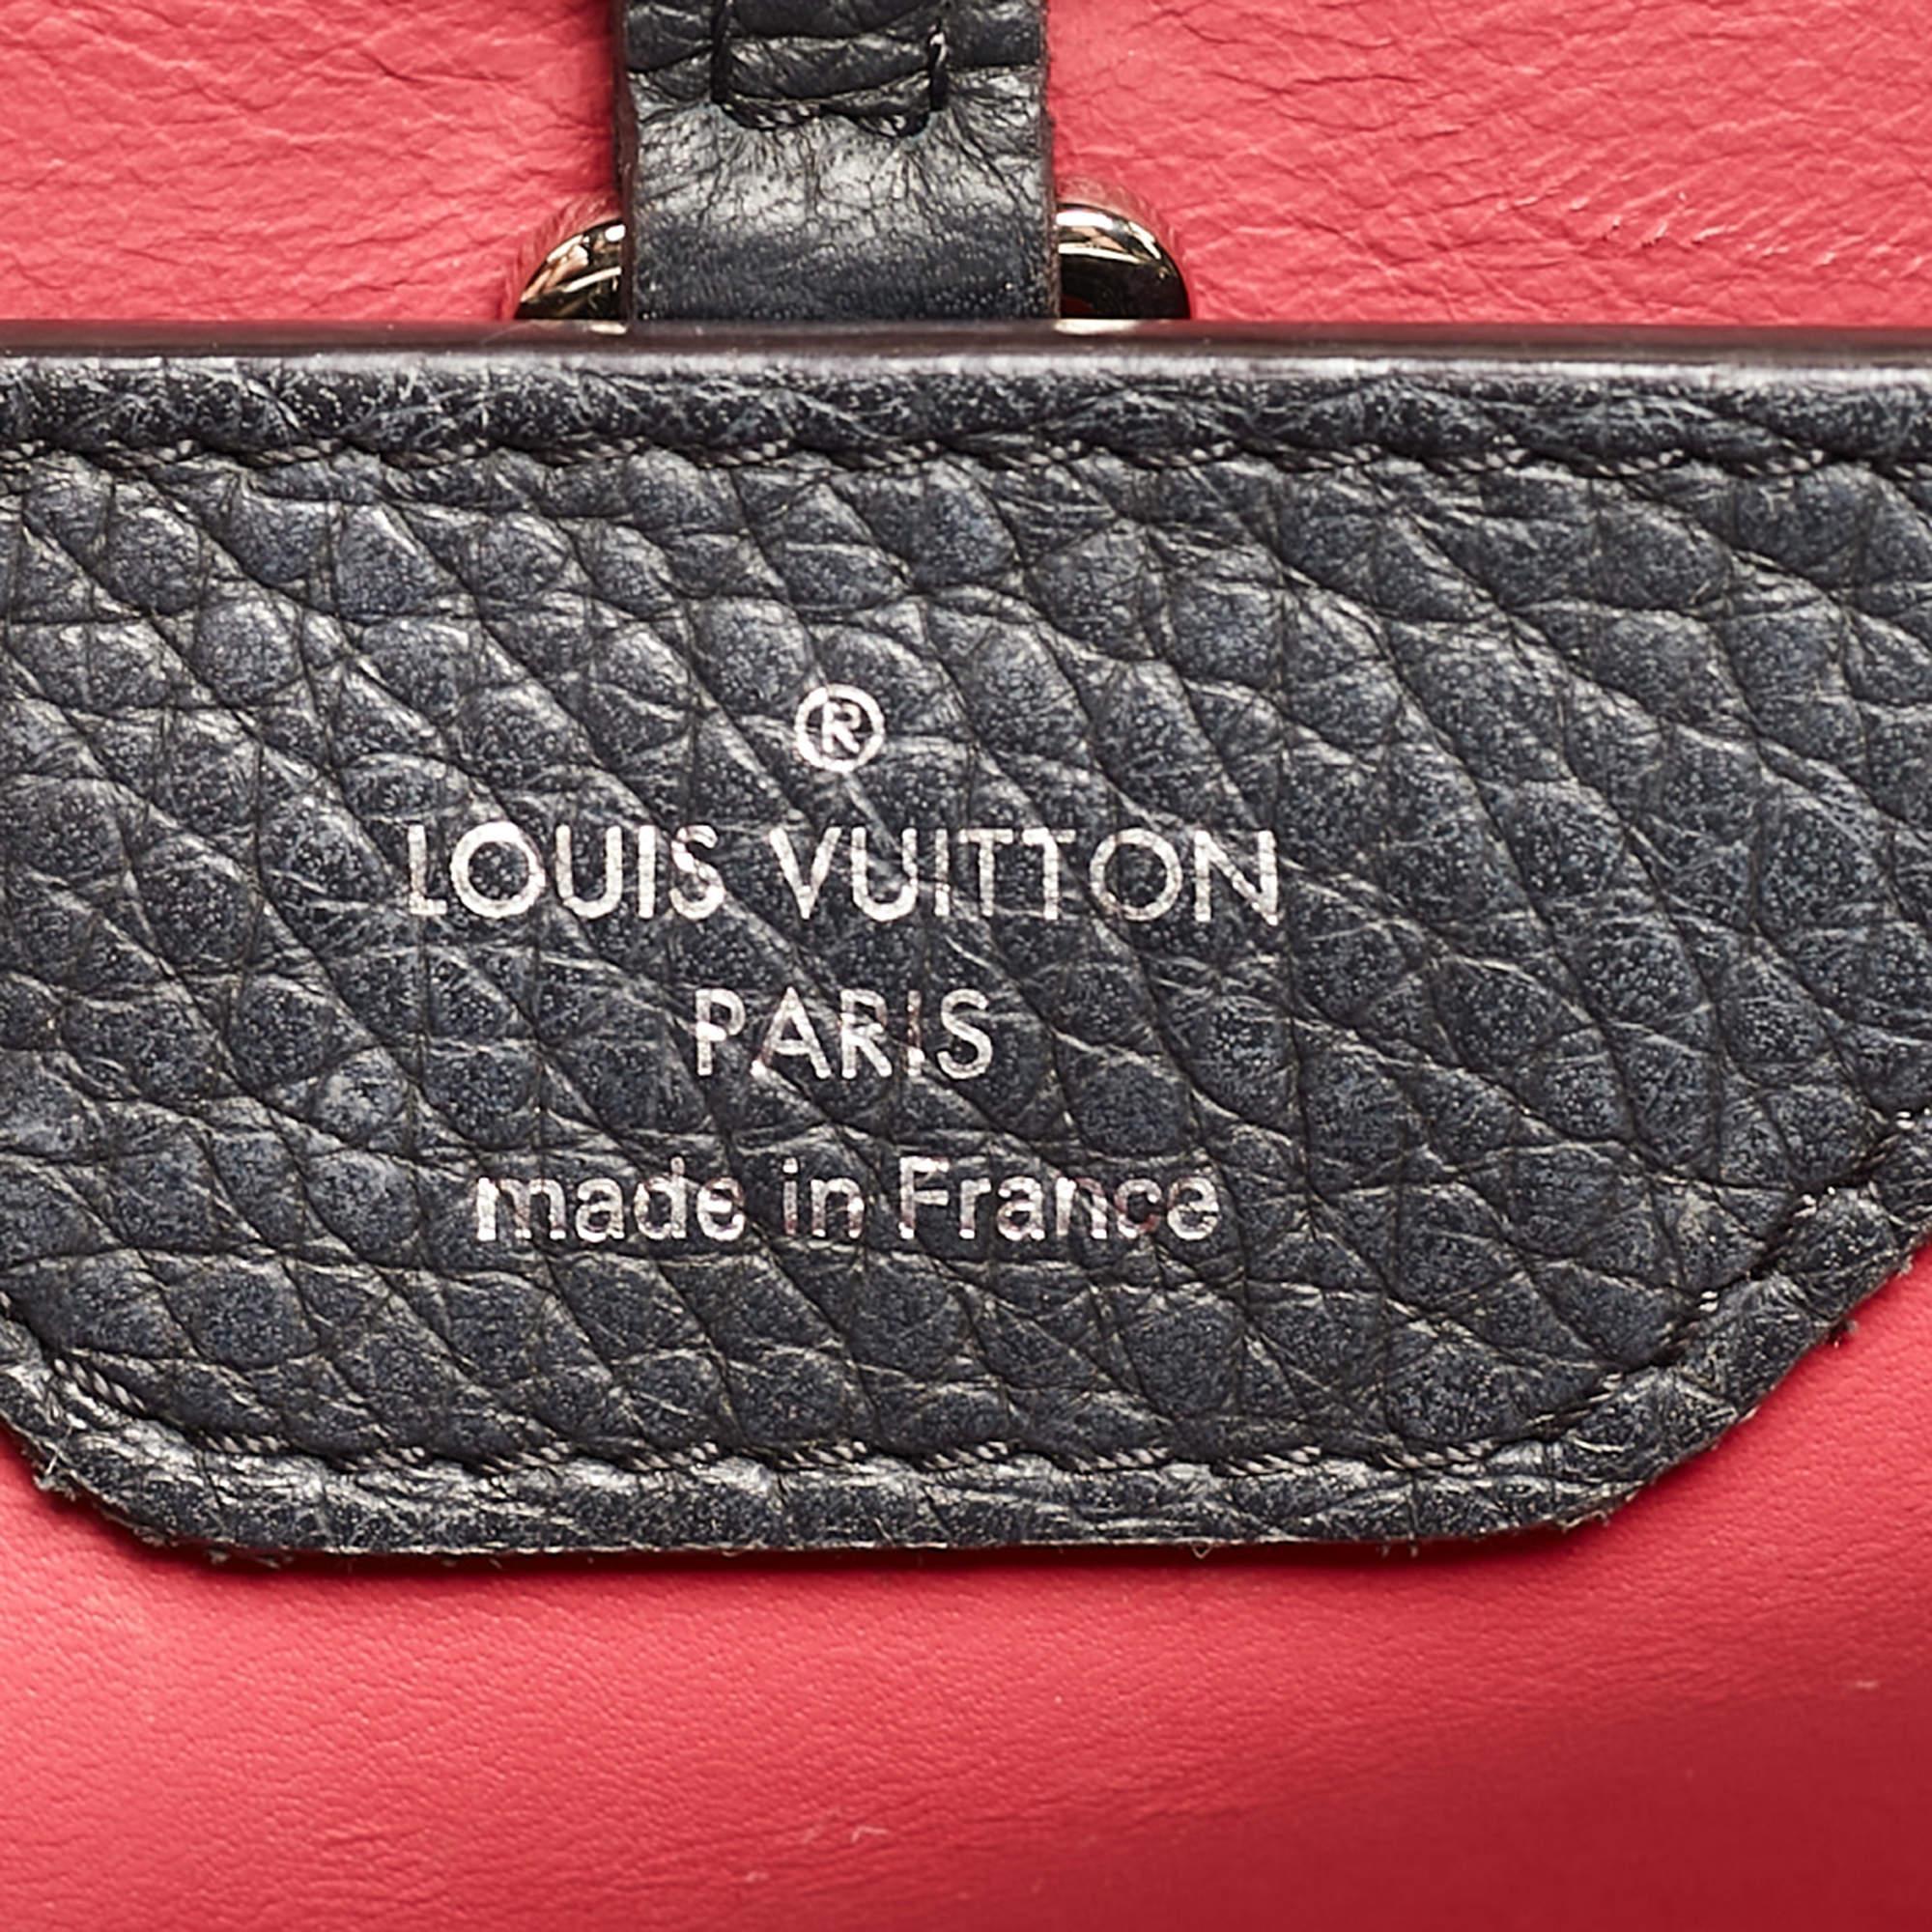 Louis Vuitton Black/Beige Taurillon Leather and Python Capucines BB Bag For Sale 2